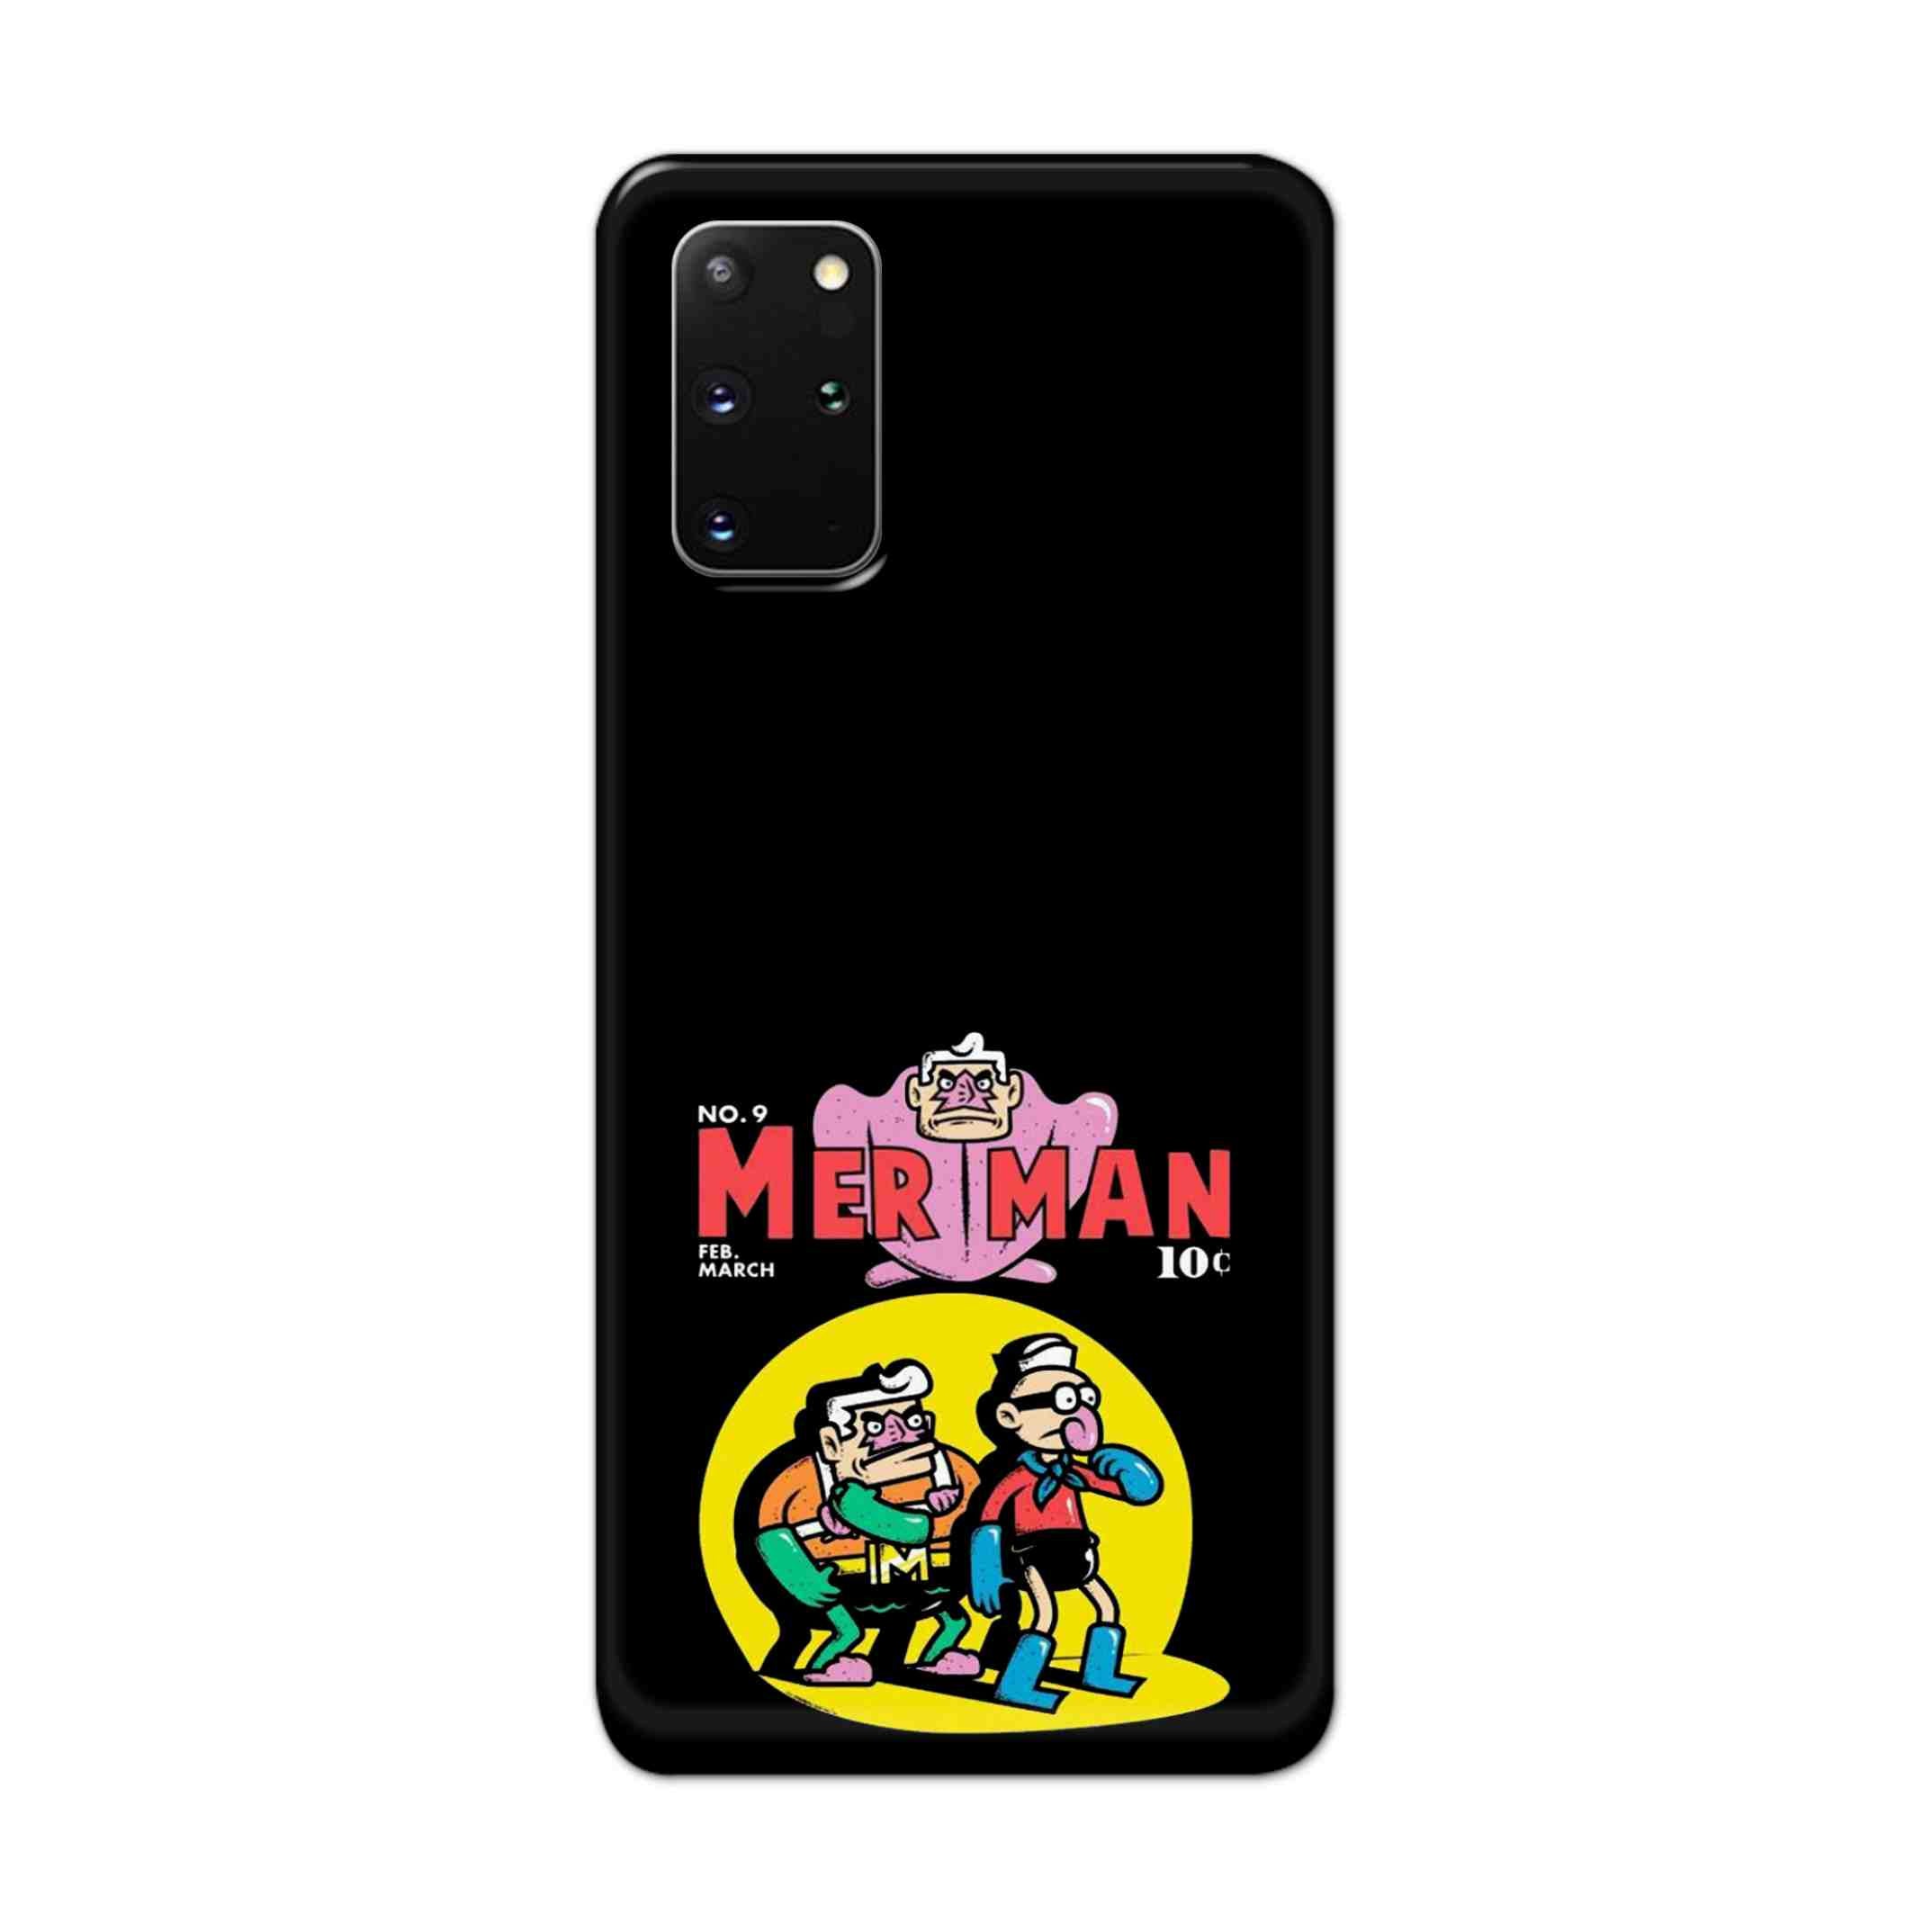 Buy Merman Hard Back Mobile Phone Case Cover For Samsung Galaxy S20 Plus Online